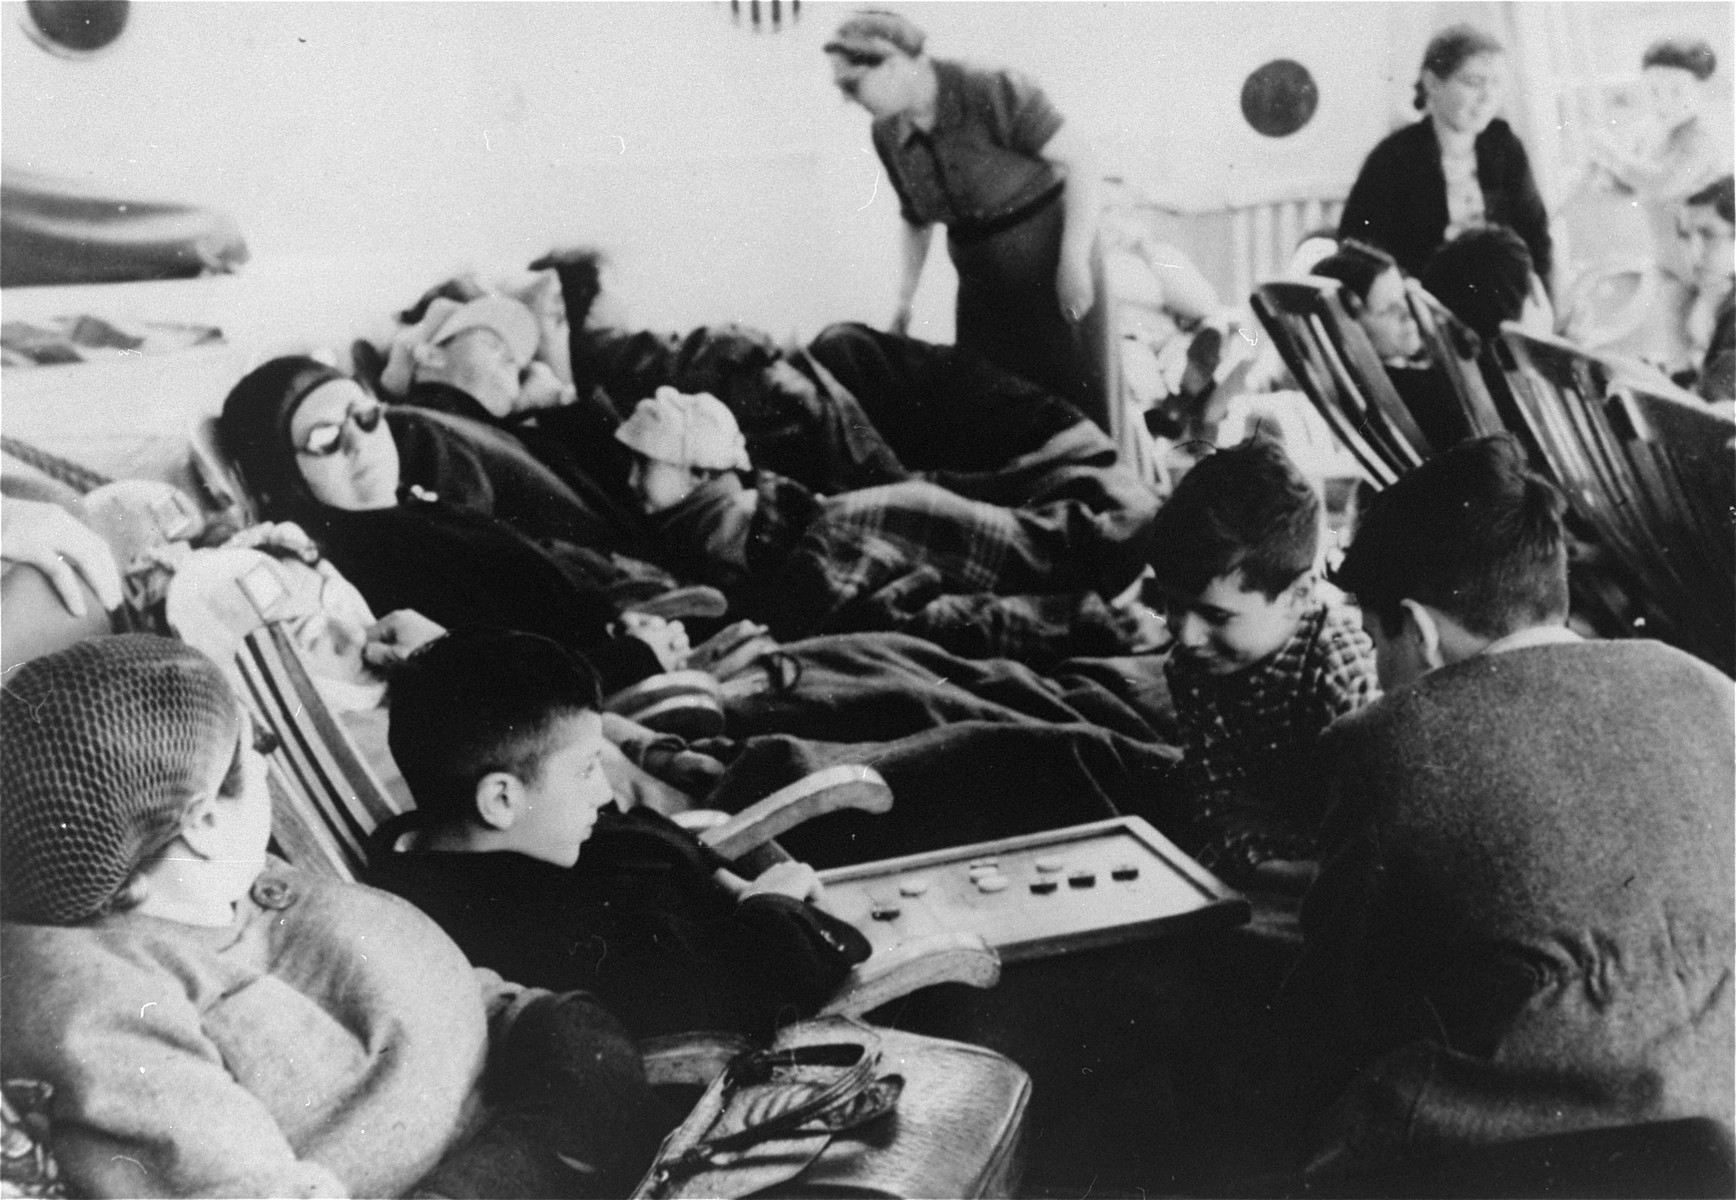 German Jewish refugees relax on the deck of the SS Iberia during the voyage from Lisbon to Havana.  

Among those pictured are Manfred and Klaus Gallewski.